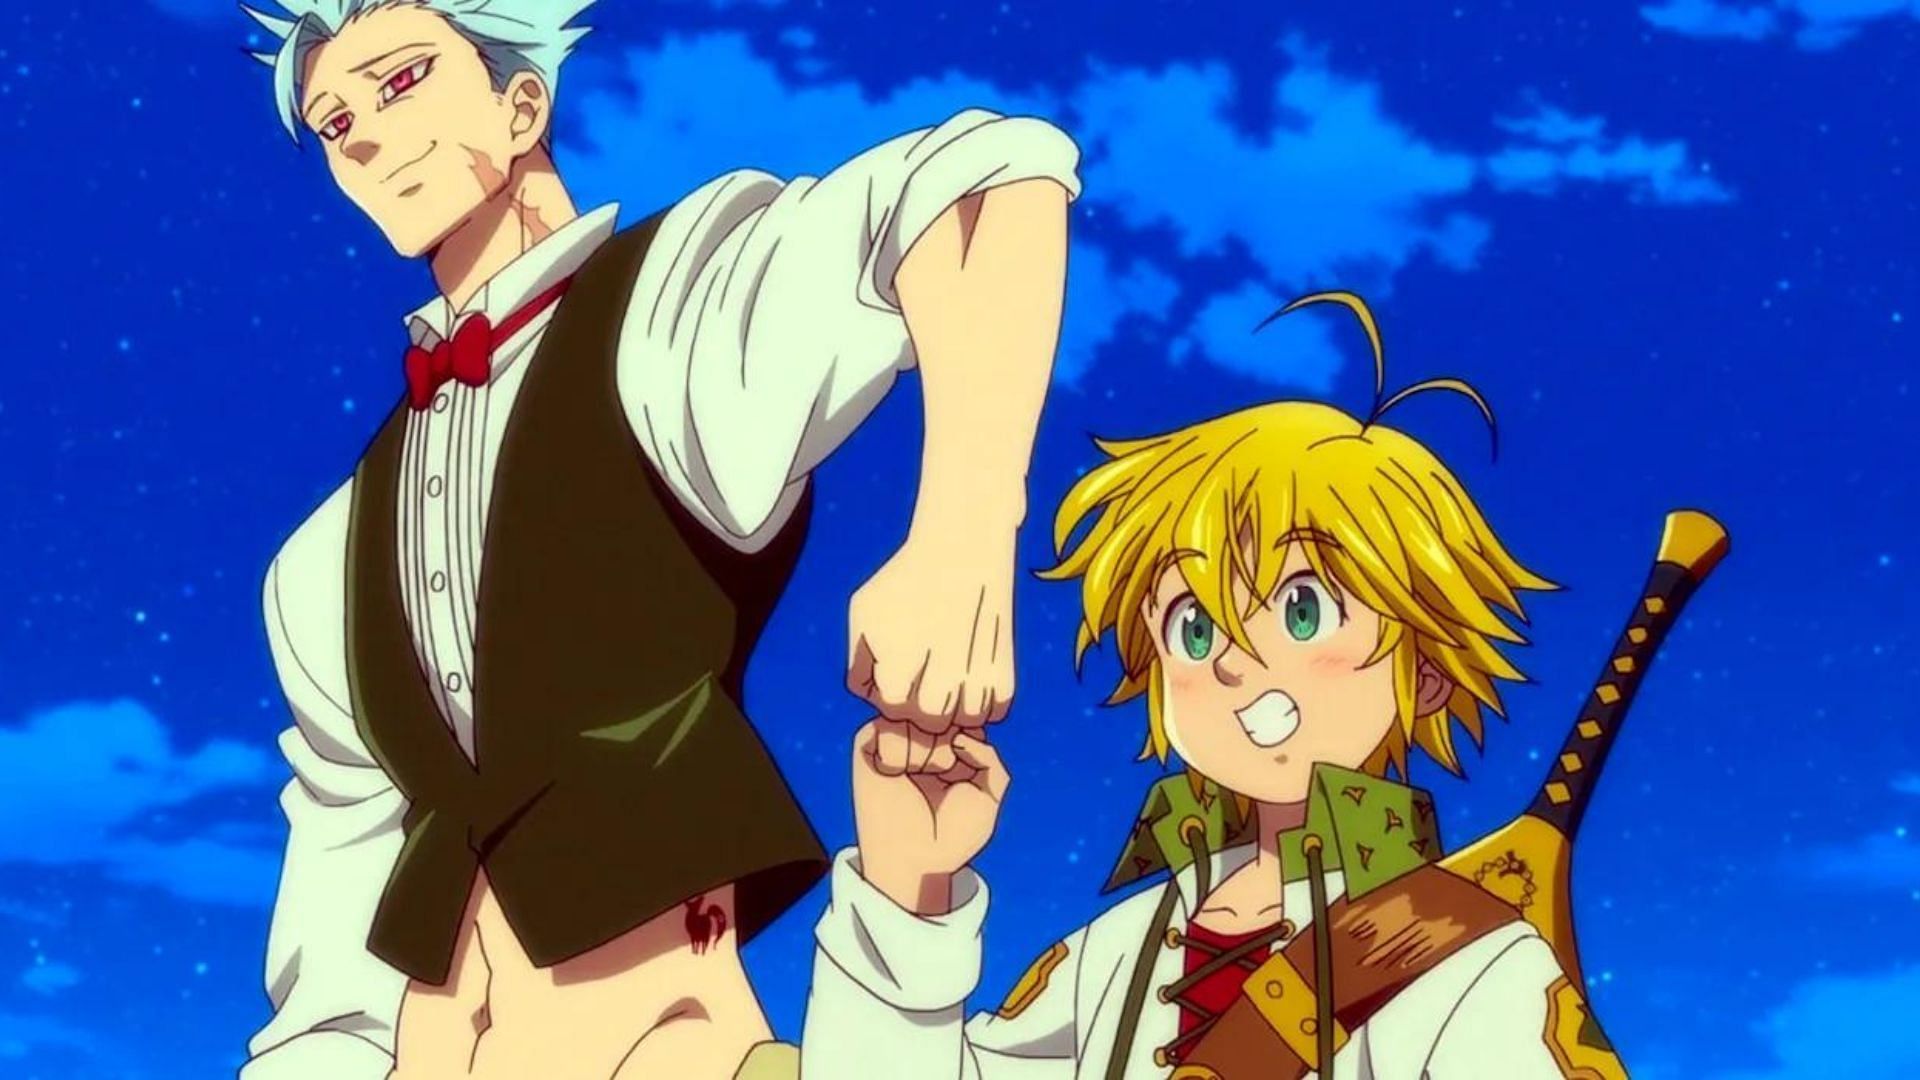 10 Anime Bromances You Can't Help But Love